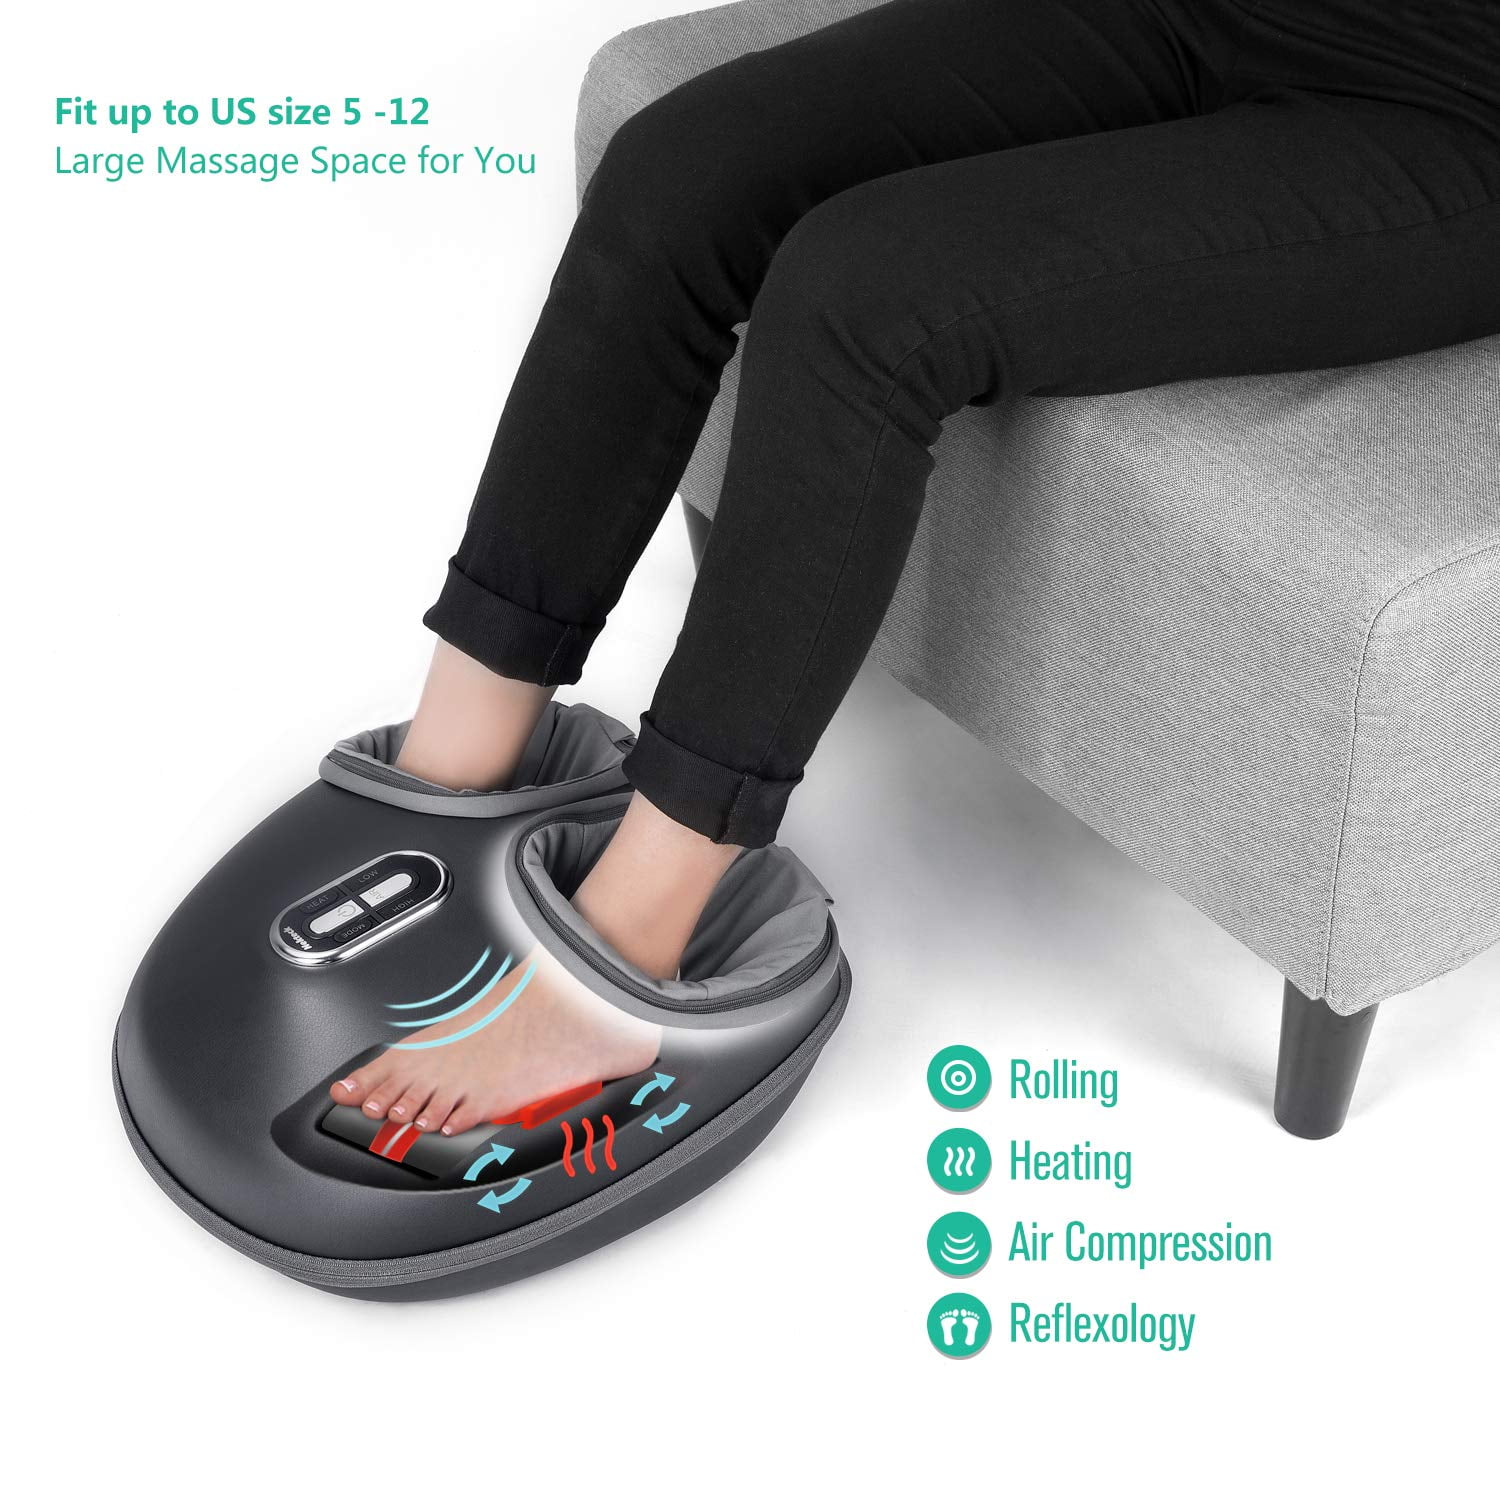 Nekteck Shiatsu Foot Massager, Increases Blood Flow Circulation, Calf  Massage with Heat Therapy, Deep Kneading, Vibration, Compression